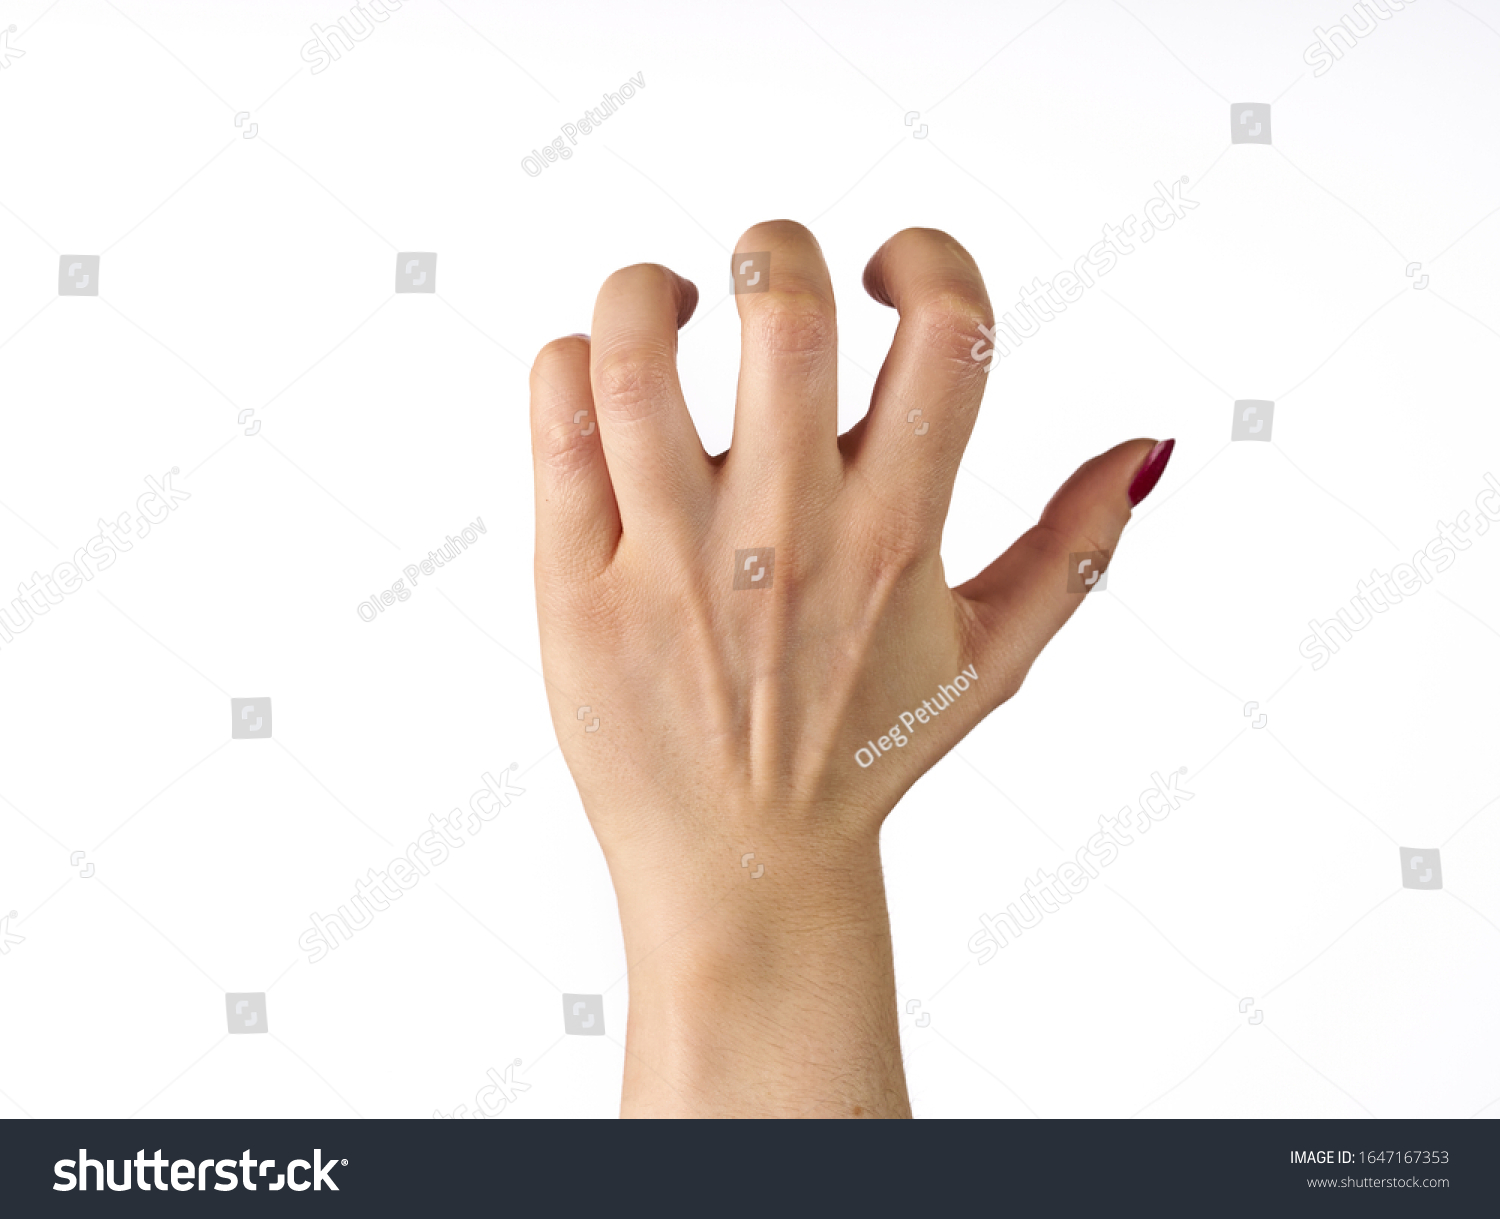 hand of a woman trying to reach or grab something. fling, touch sign. isolated on white background. #1647167353